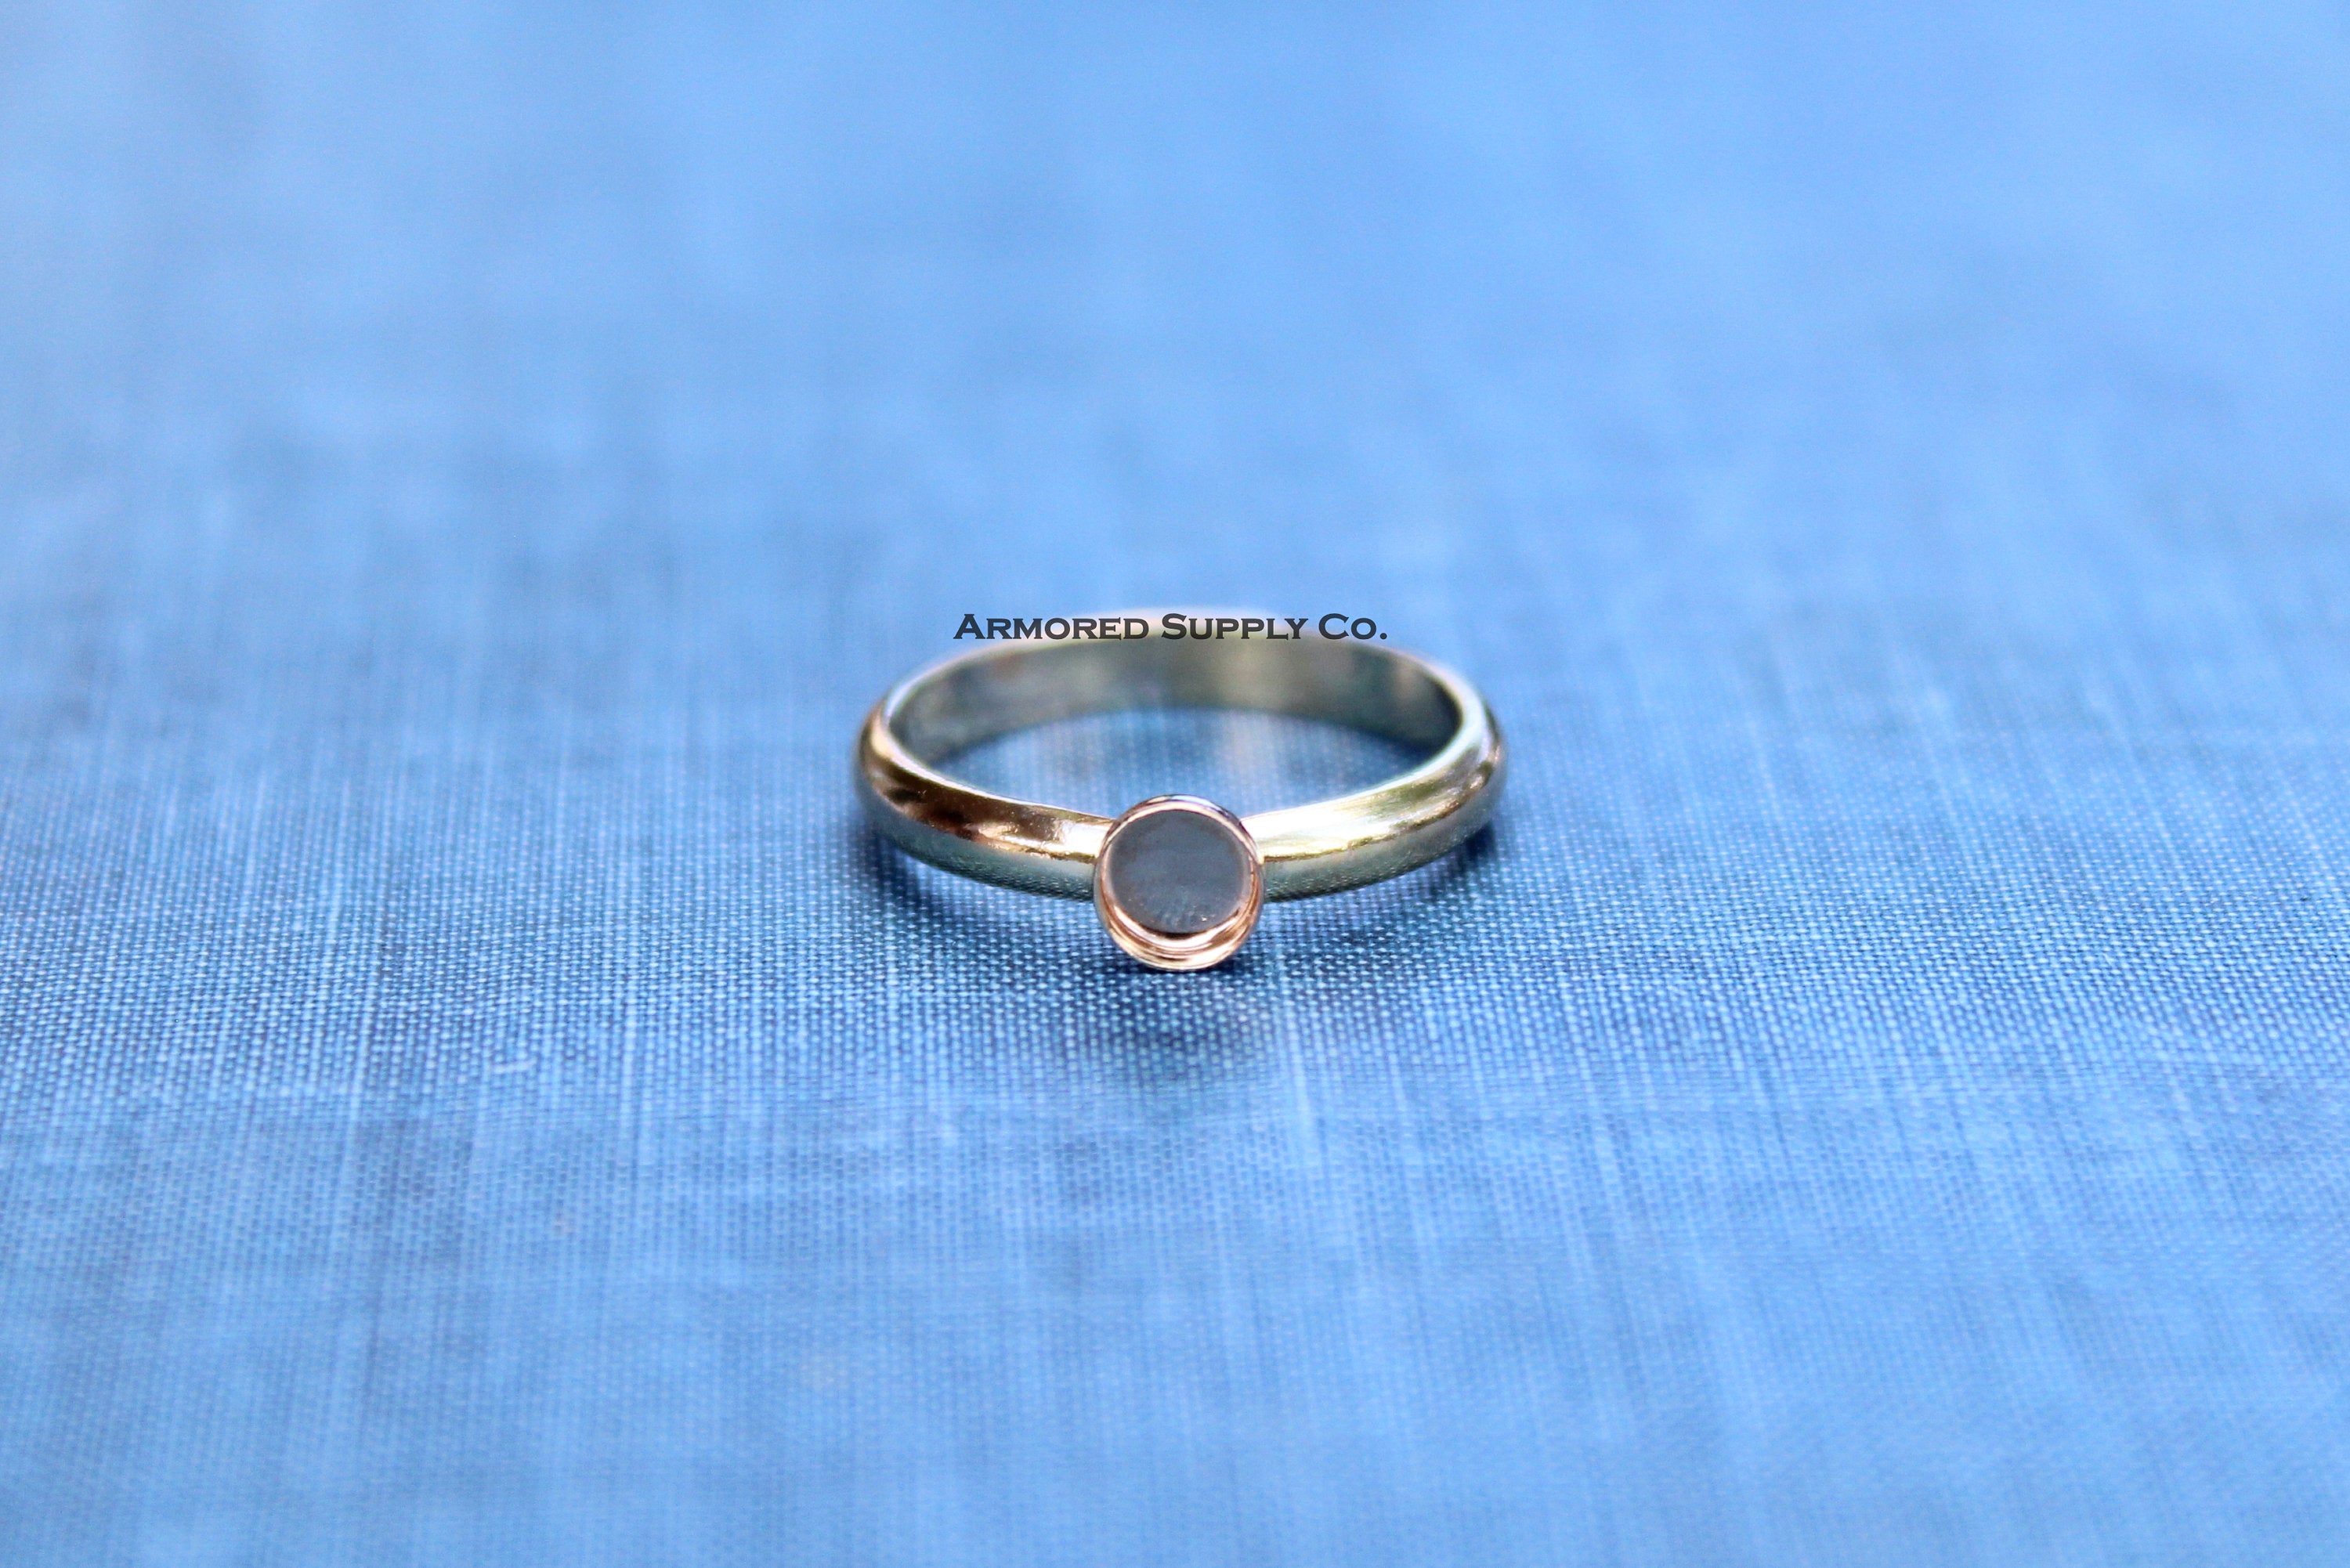 Gold Filled 4mm Bezel Cup Ring blank, Half Round Ring Band, Breast Milk DIY ring, DIY jewelry supplies, wholesale jewelry, diy ring blank